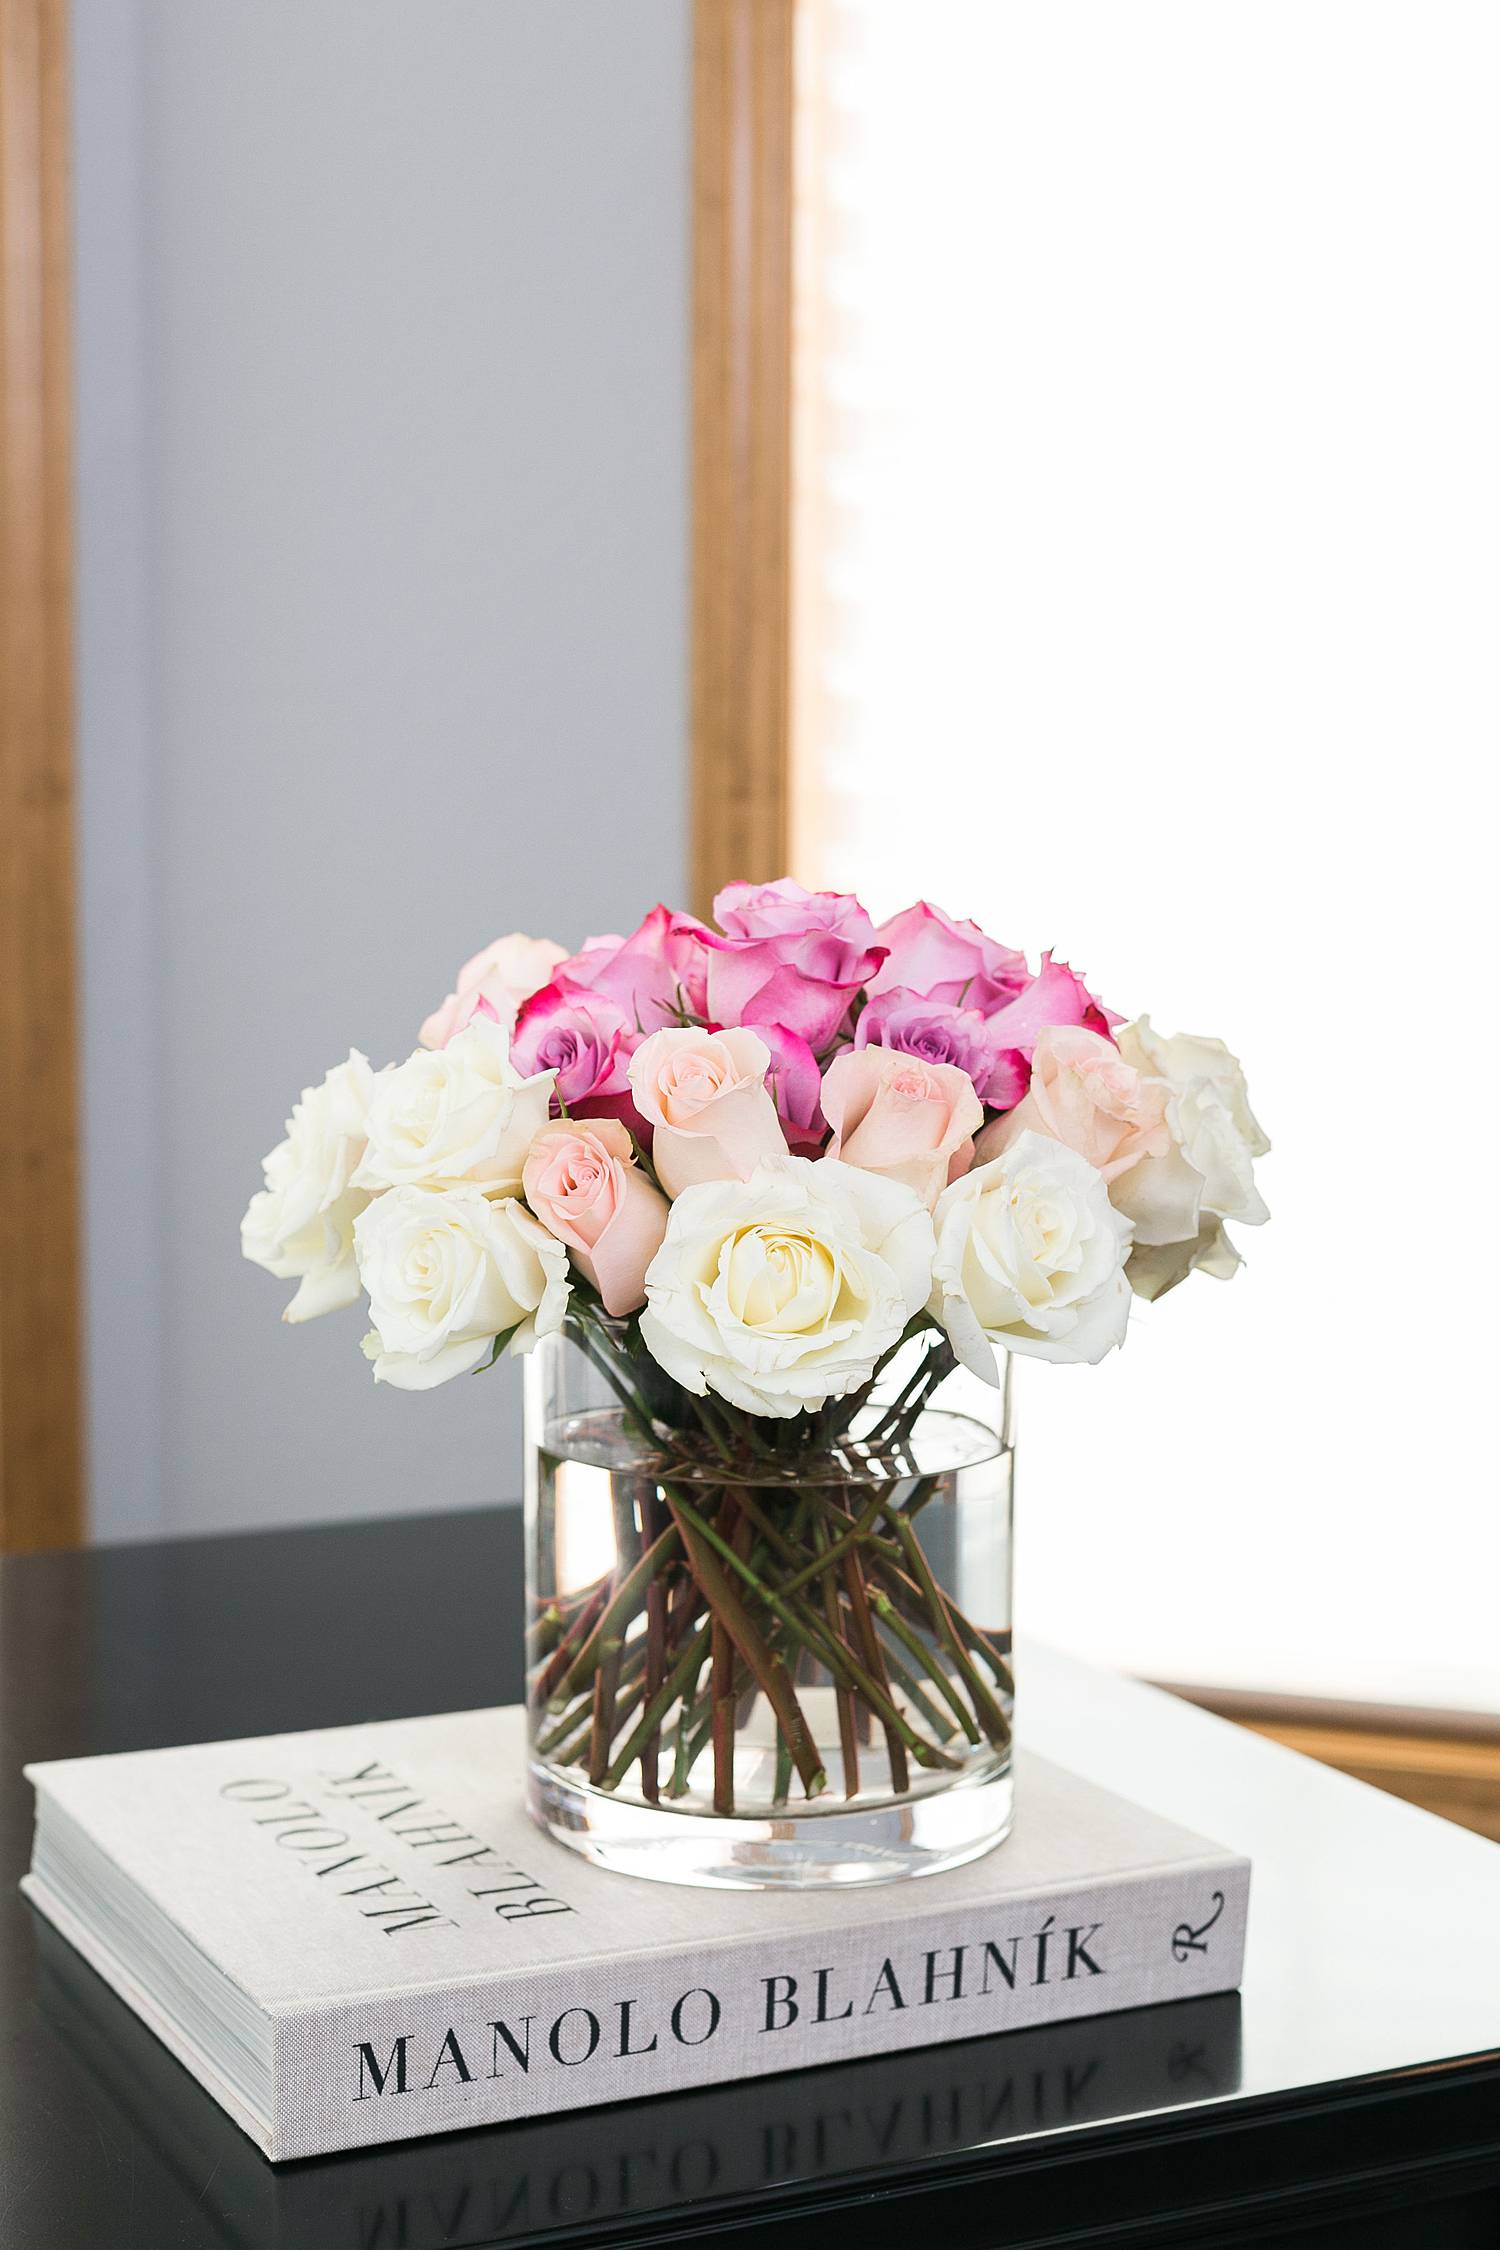 bouquet of white and pink roses on top of manolo blahnik fashion book